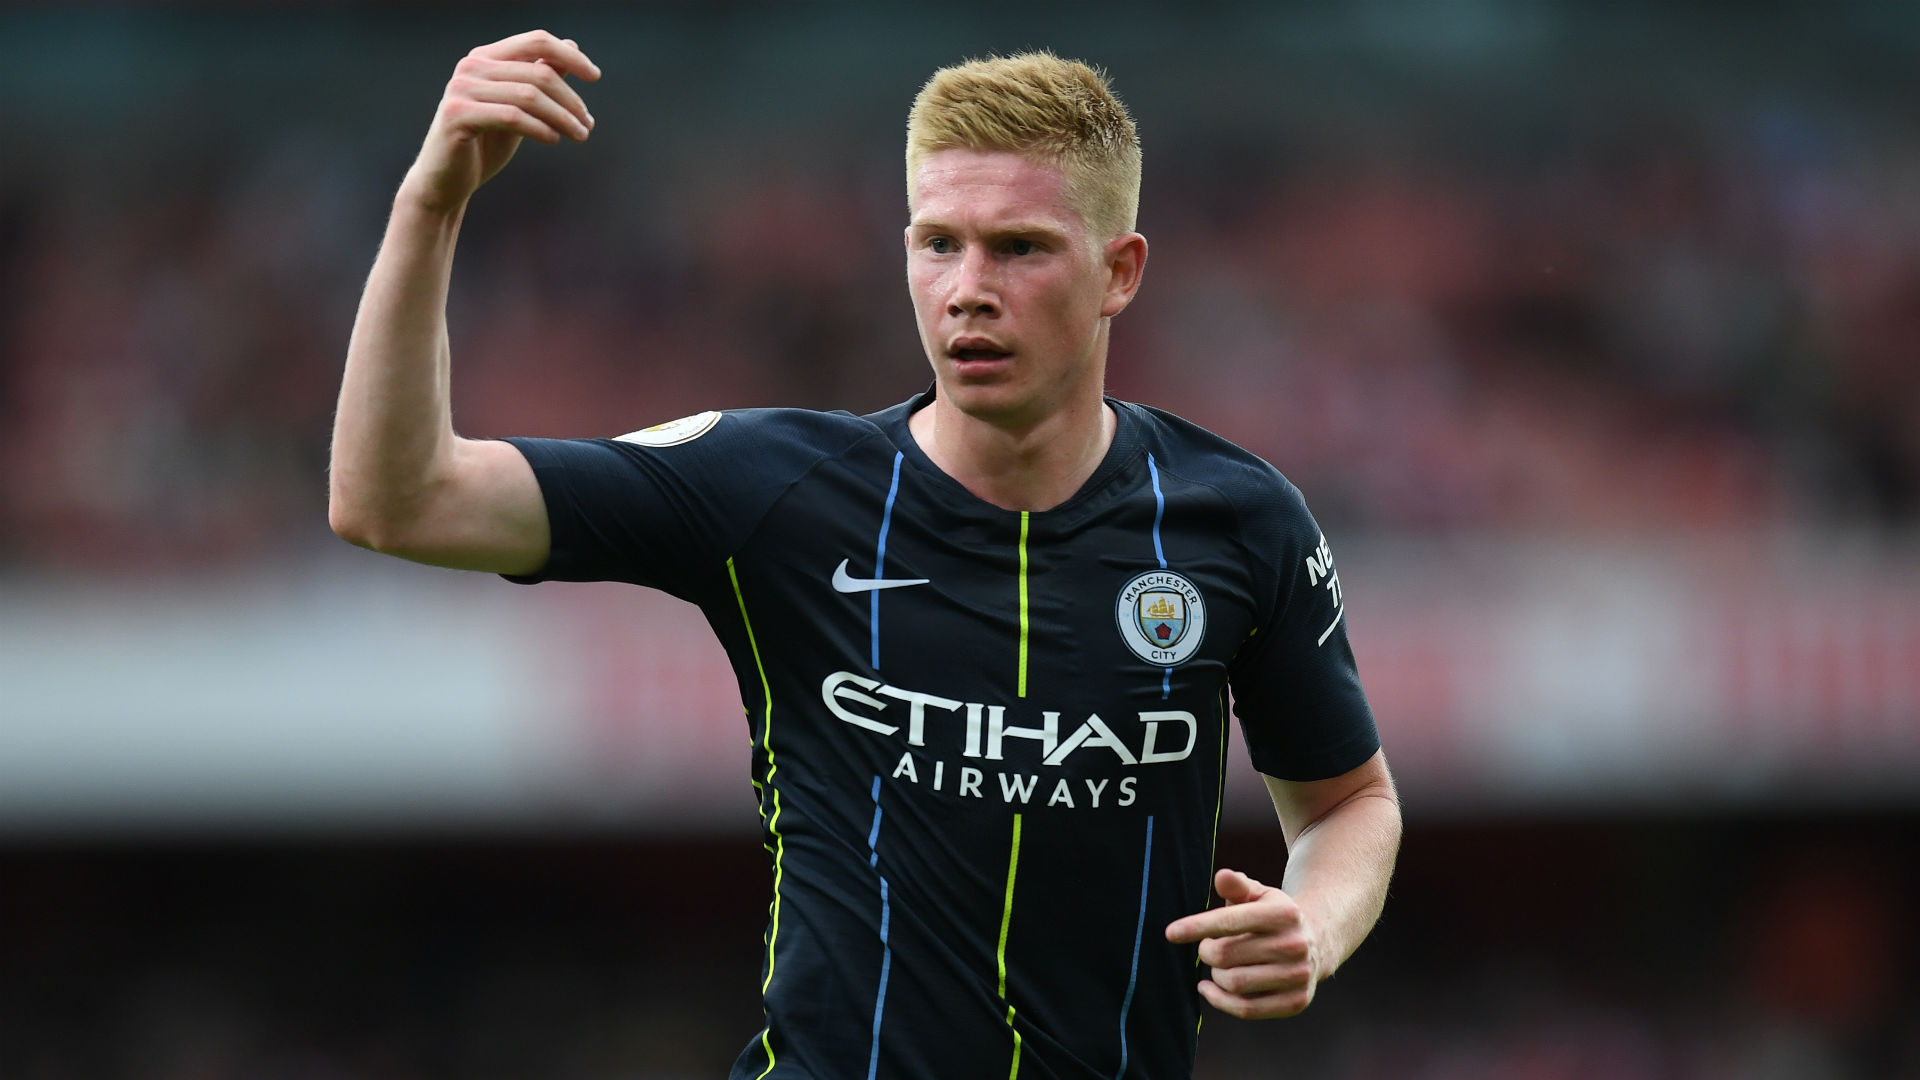 Manchester City welcome Kevin De Bruyne and Sergio Aguero back to the fold on Saturday, but Raheem Sterling is among the substitutes.